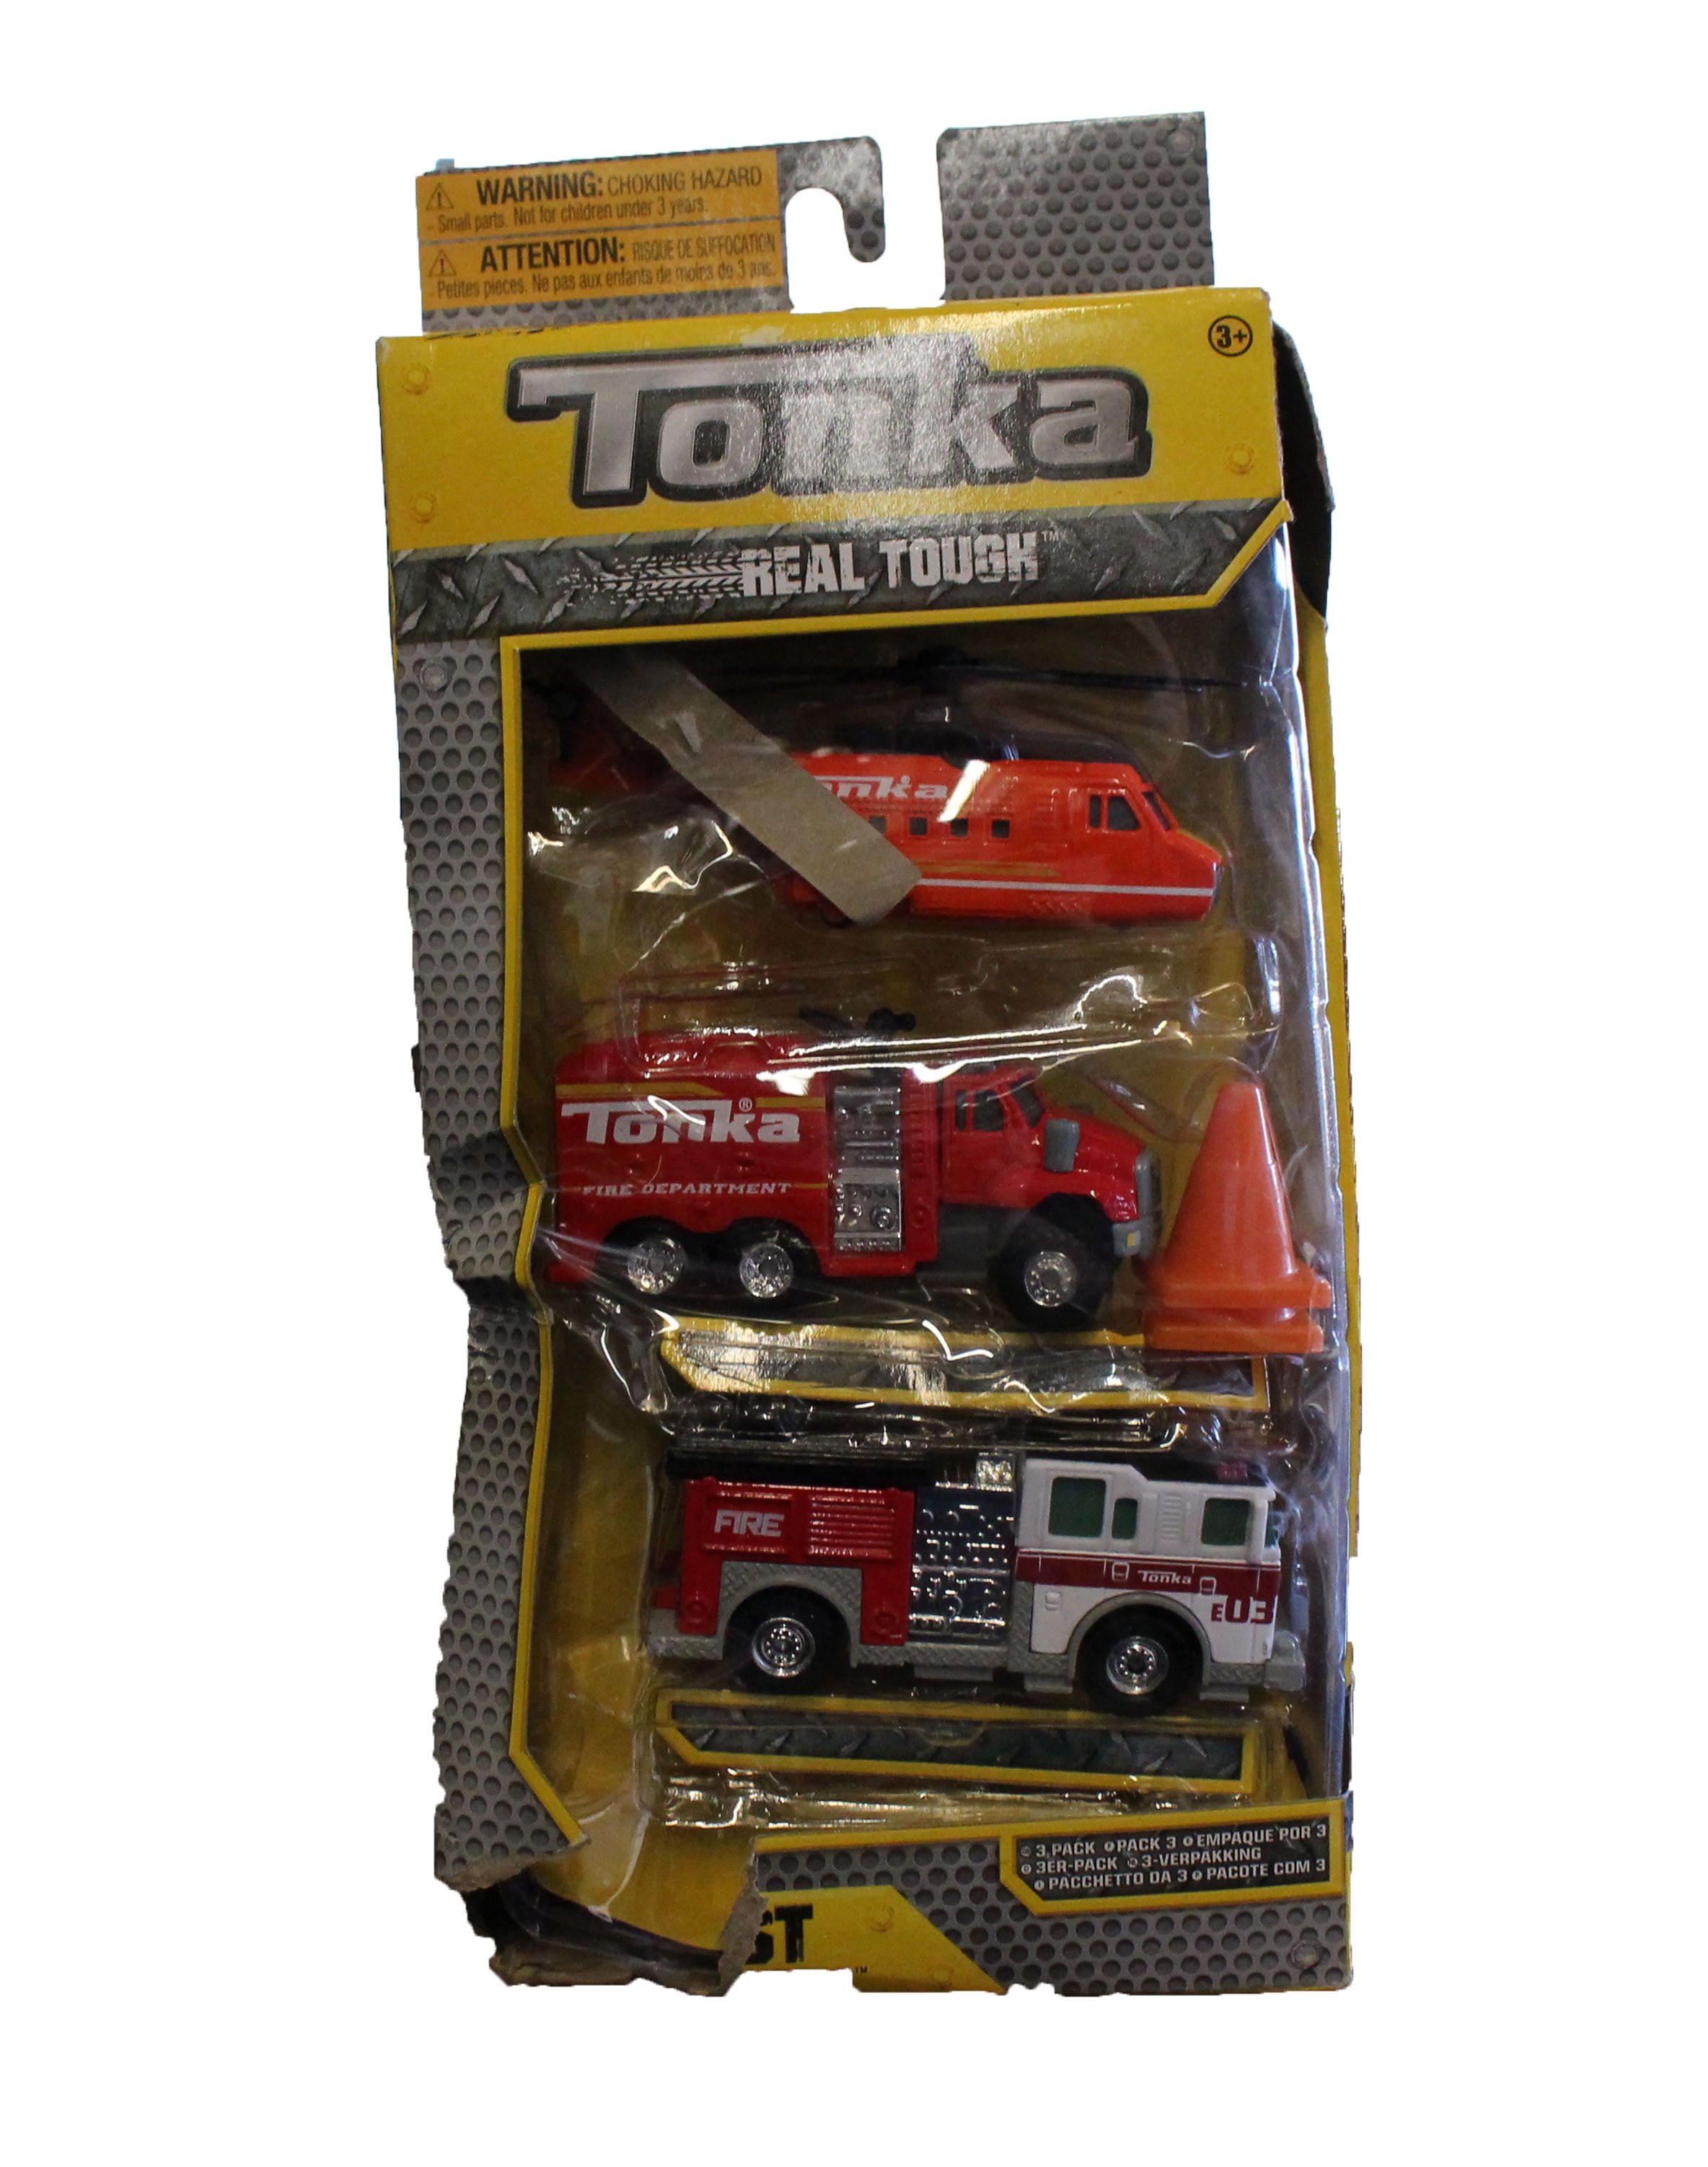 NEW Lot 3 Tonka Real Tough Rescue Force Helicopter Truck Firetruck Lights Sounds